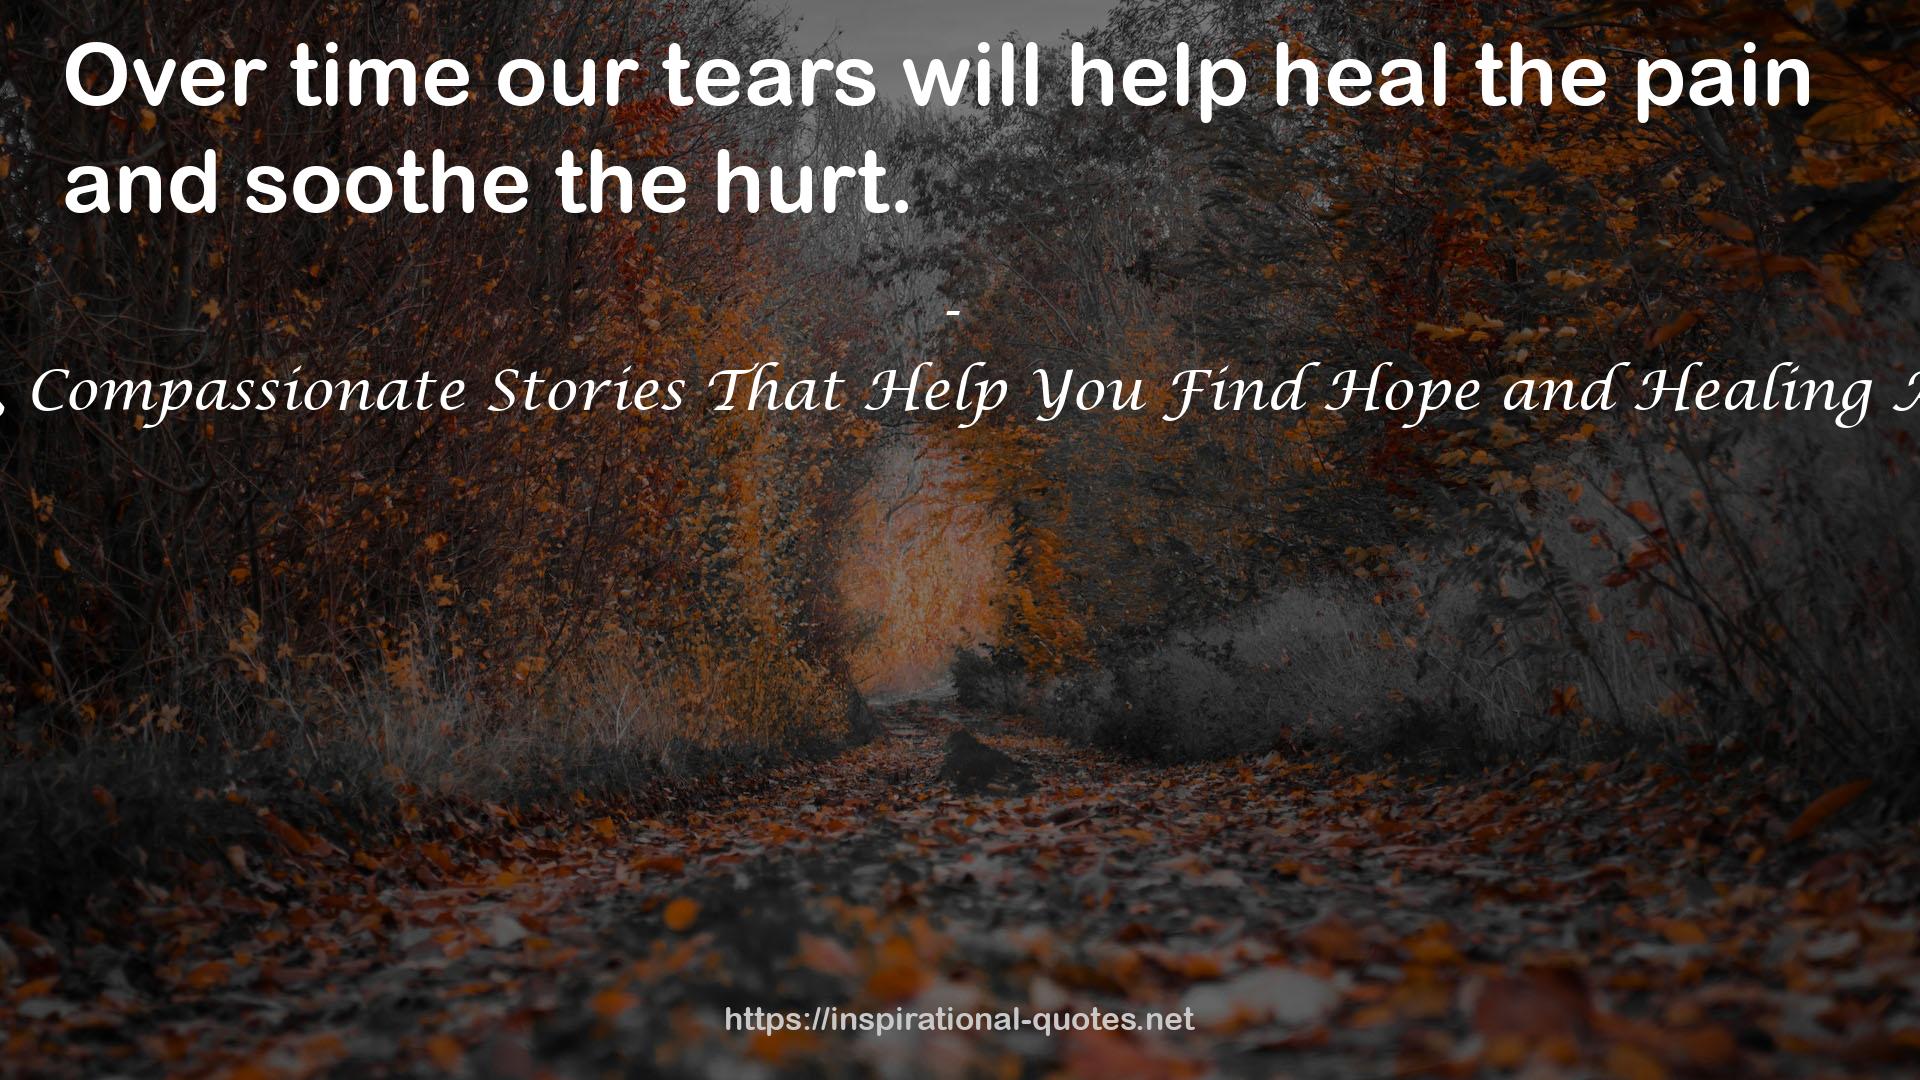 It's Okay to Cry: Warm, Compassionate Stories That Help You Find Hope and Healing After the Death of a Pet QUOTES